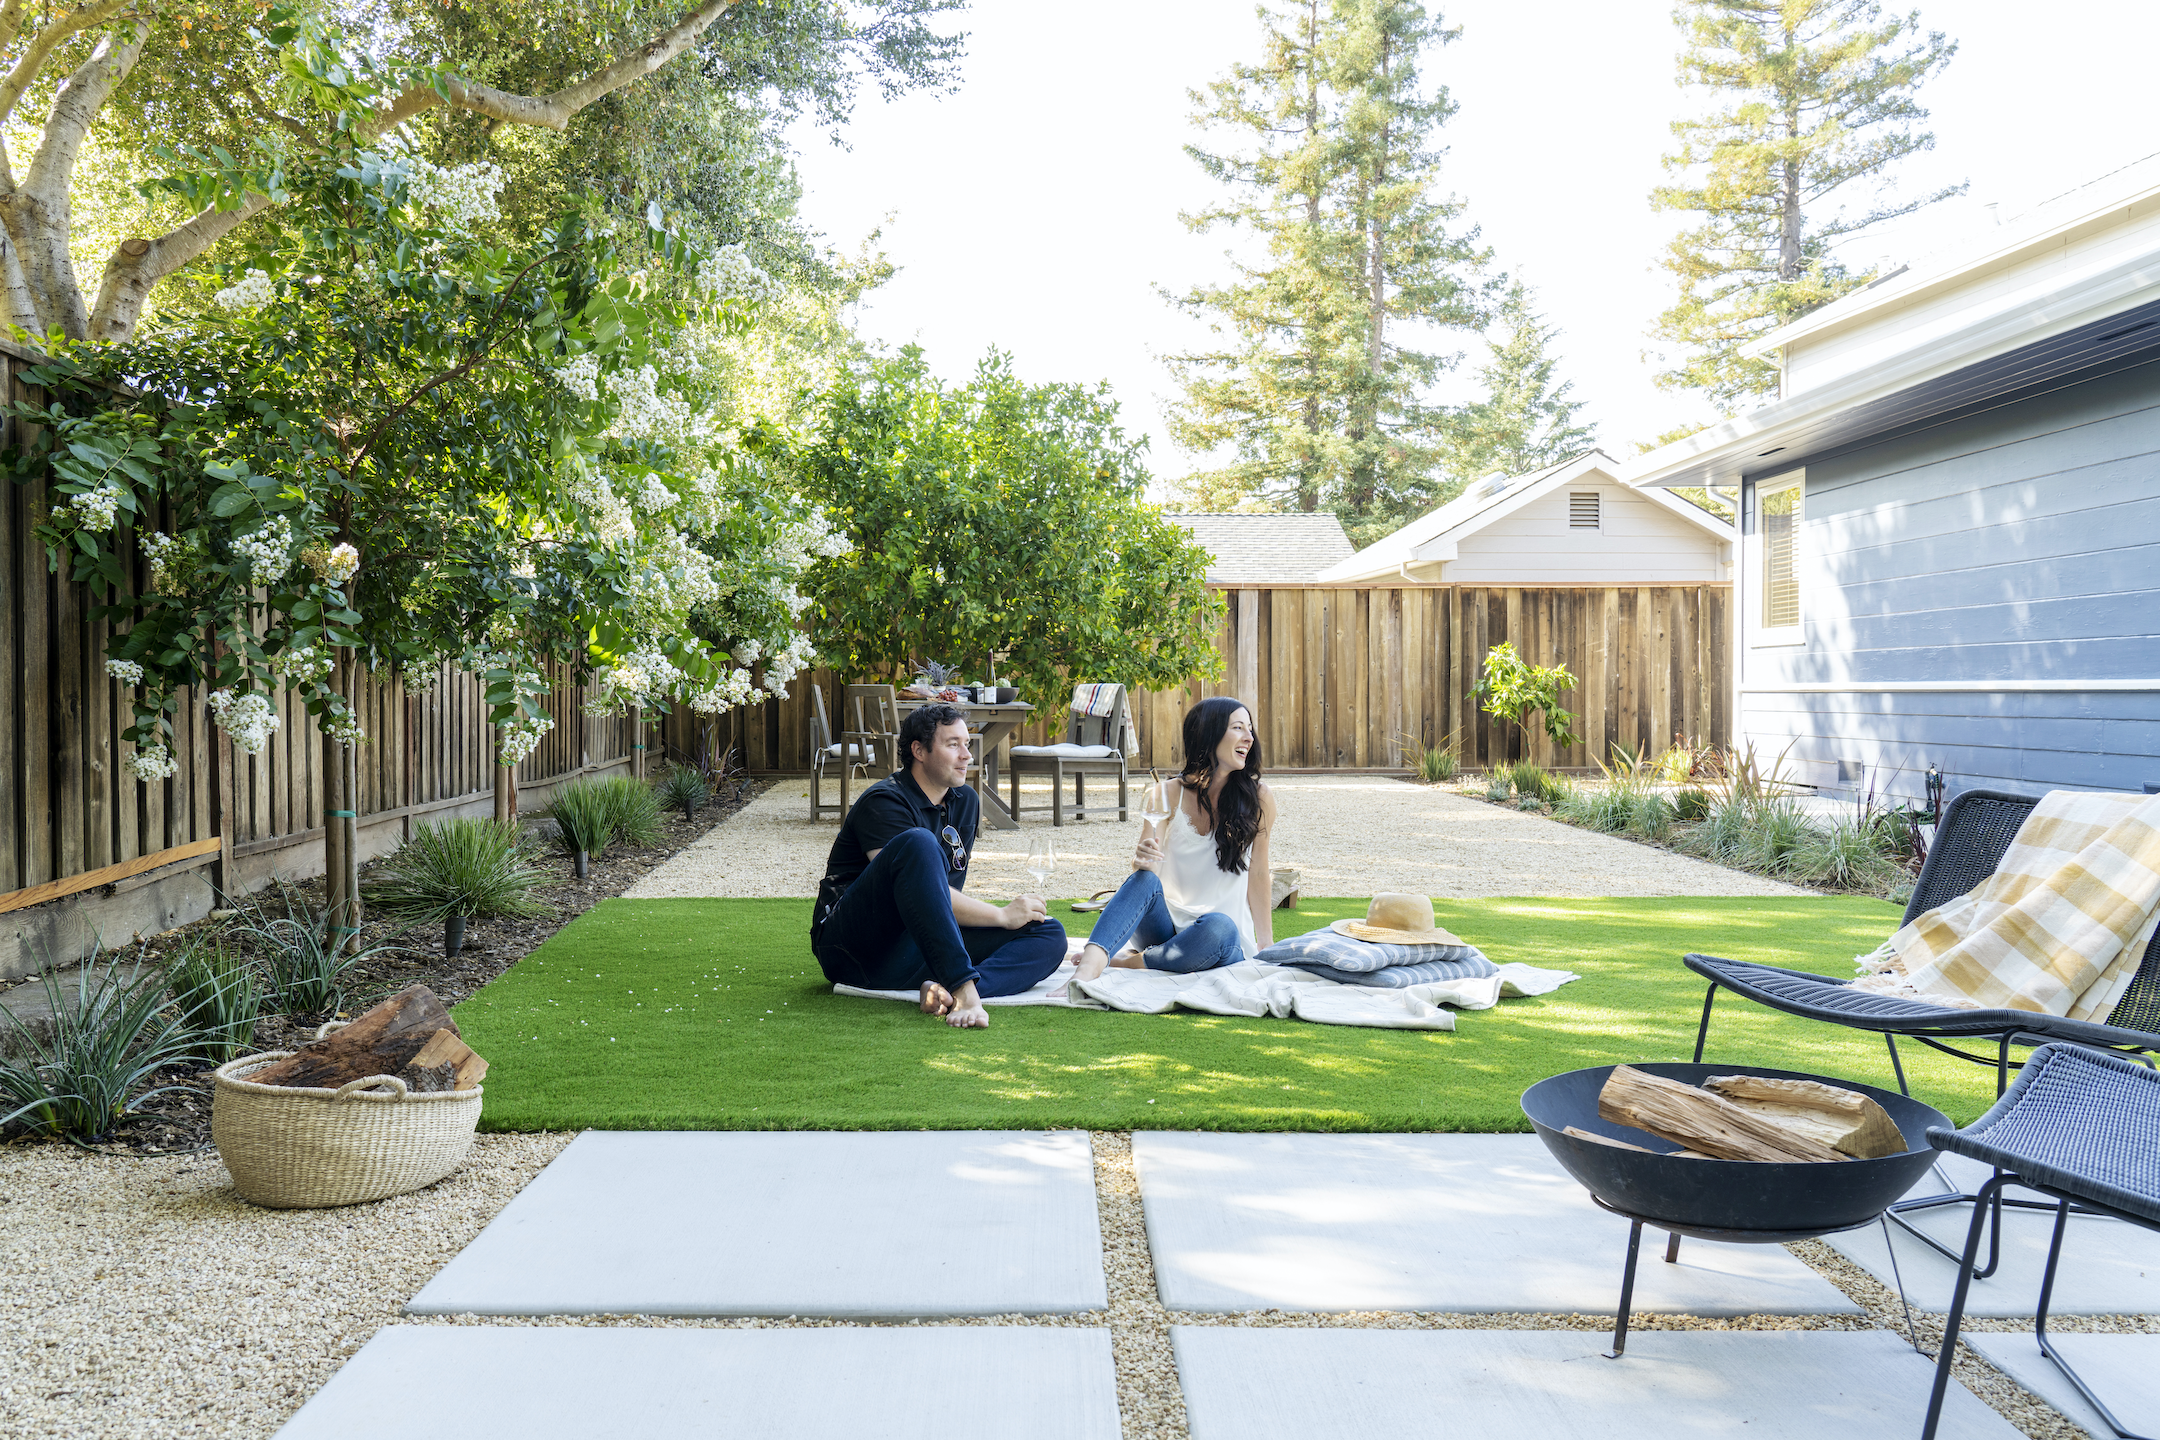 A combination of synthetic turf, gravel, and climate-adapted plants make this Yardzen yard a close-to-no water backyard!